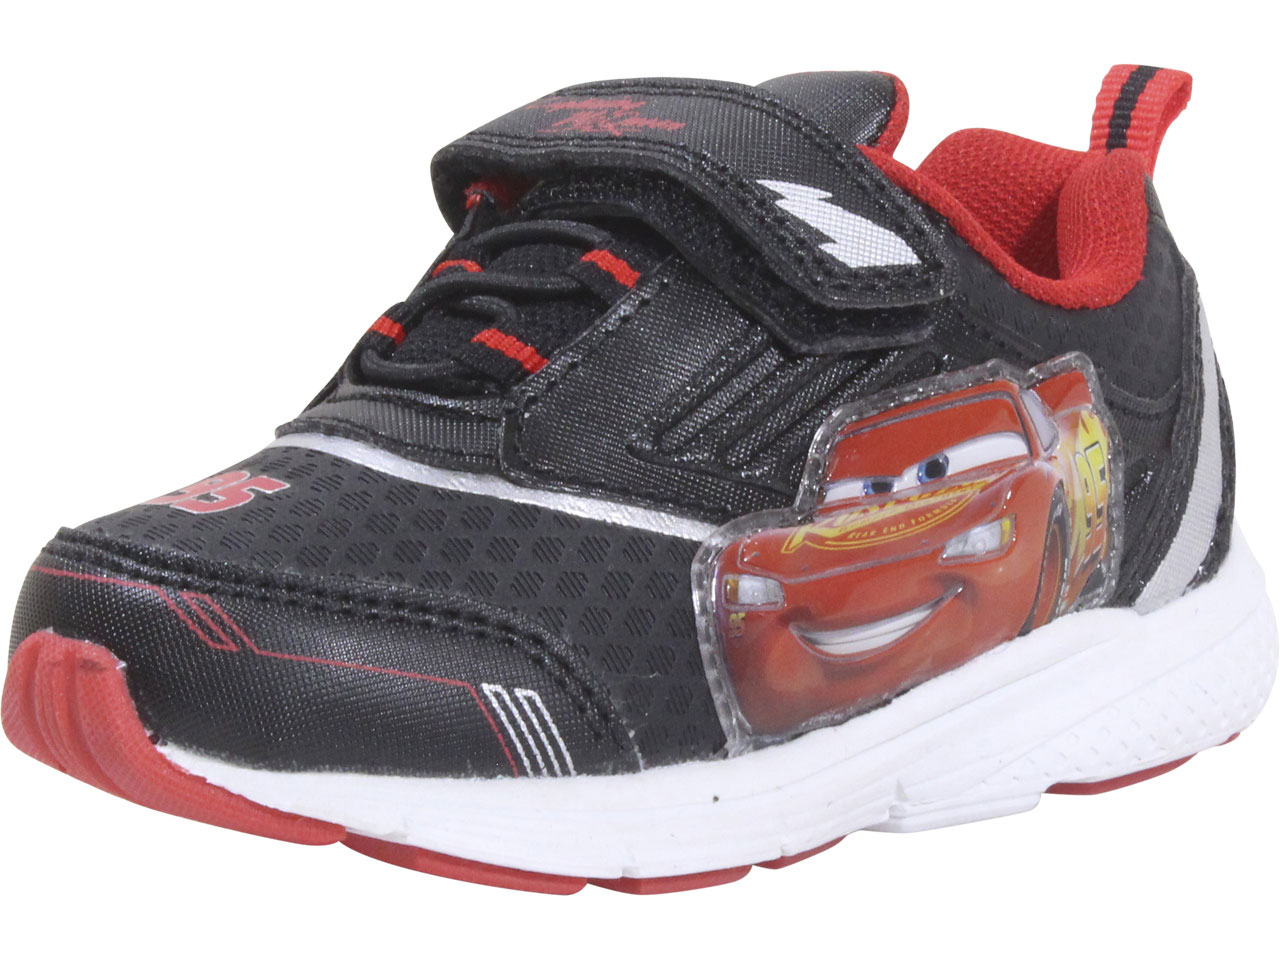 High Tops - Red/Cars - Kids | H&M US